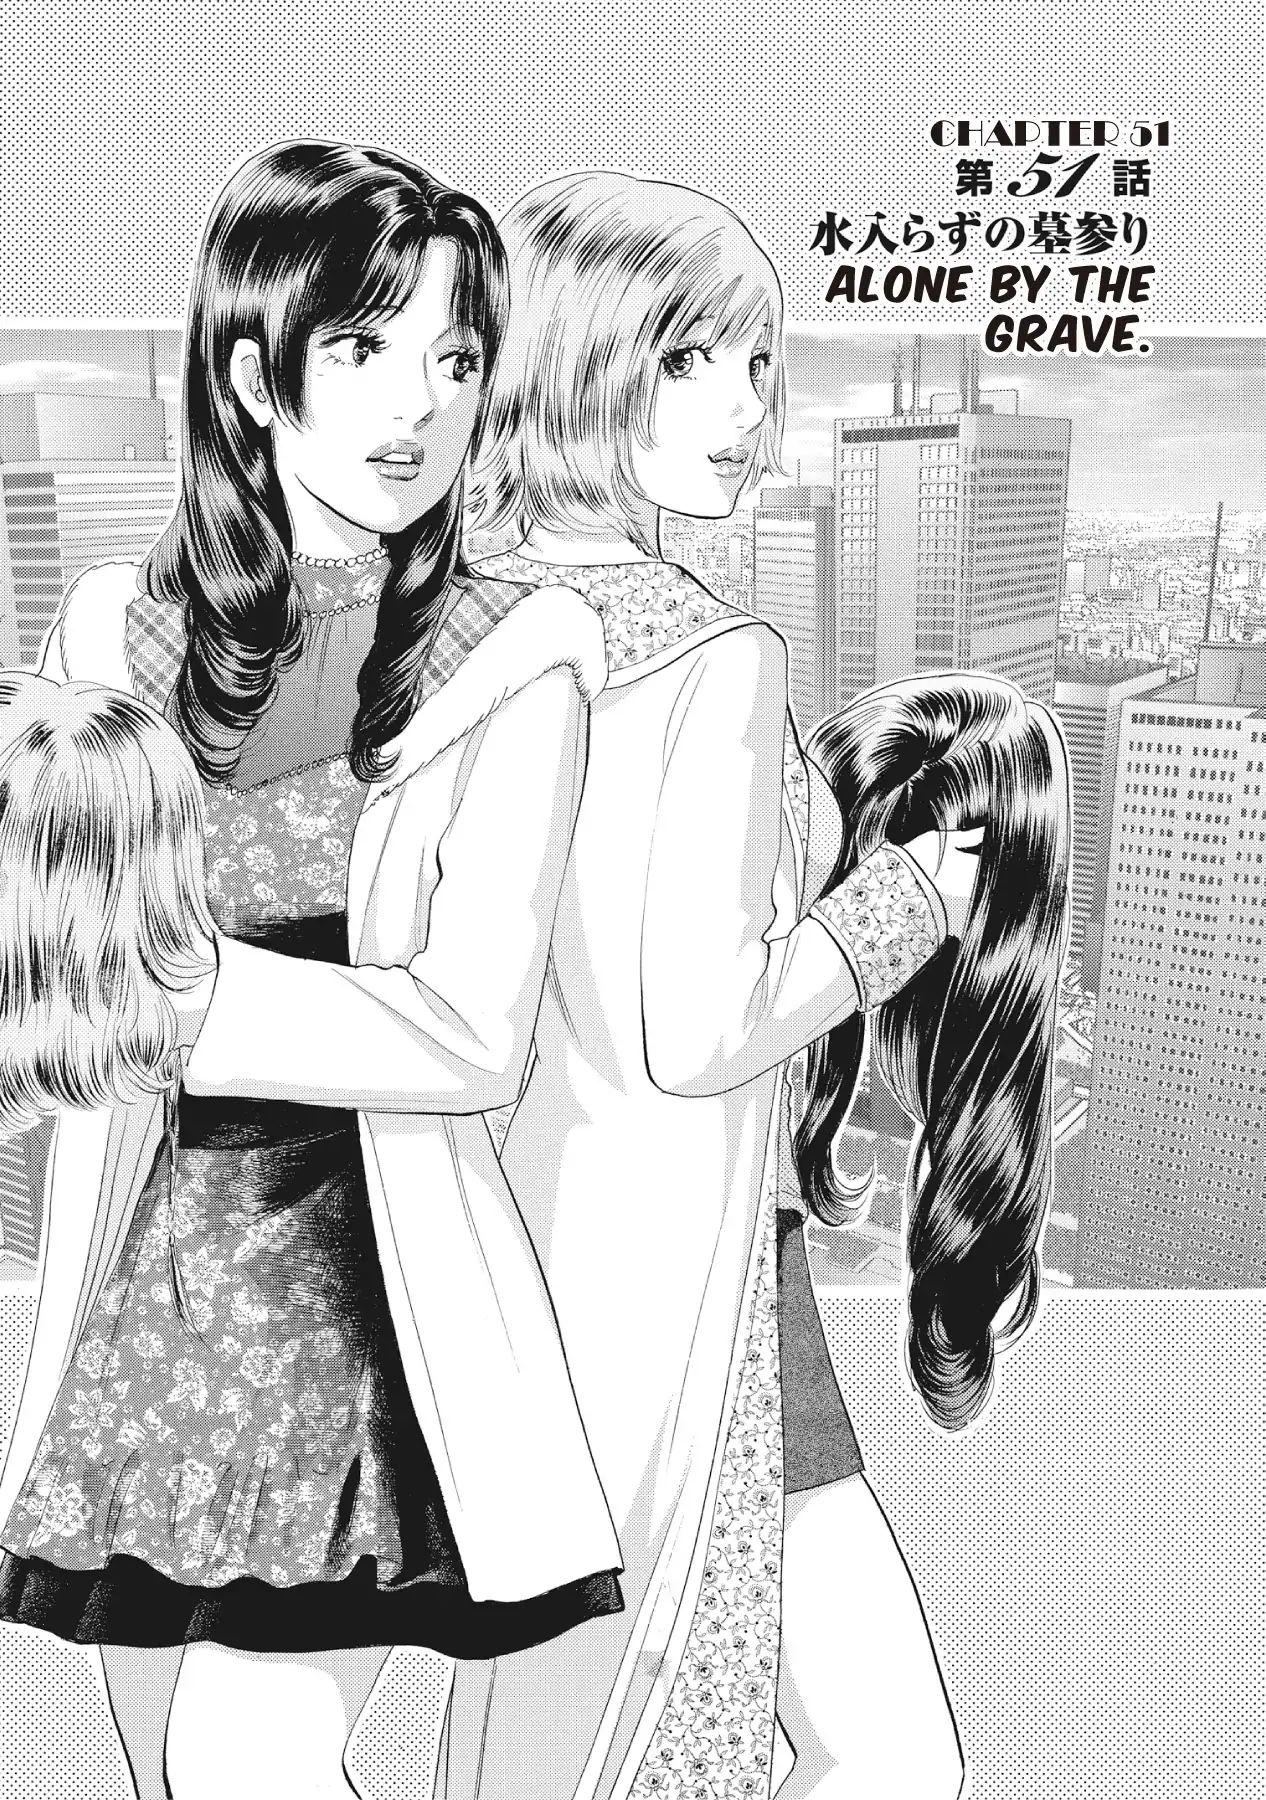 Duet Of Beautiful Goddesses Vol.5 Chapter 51: Alone By The Grave - Picture 1